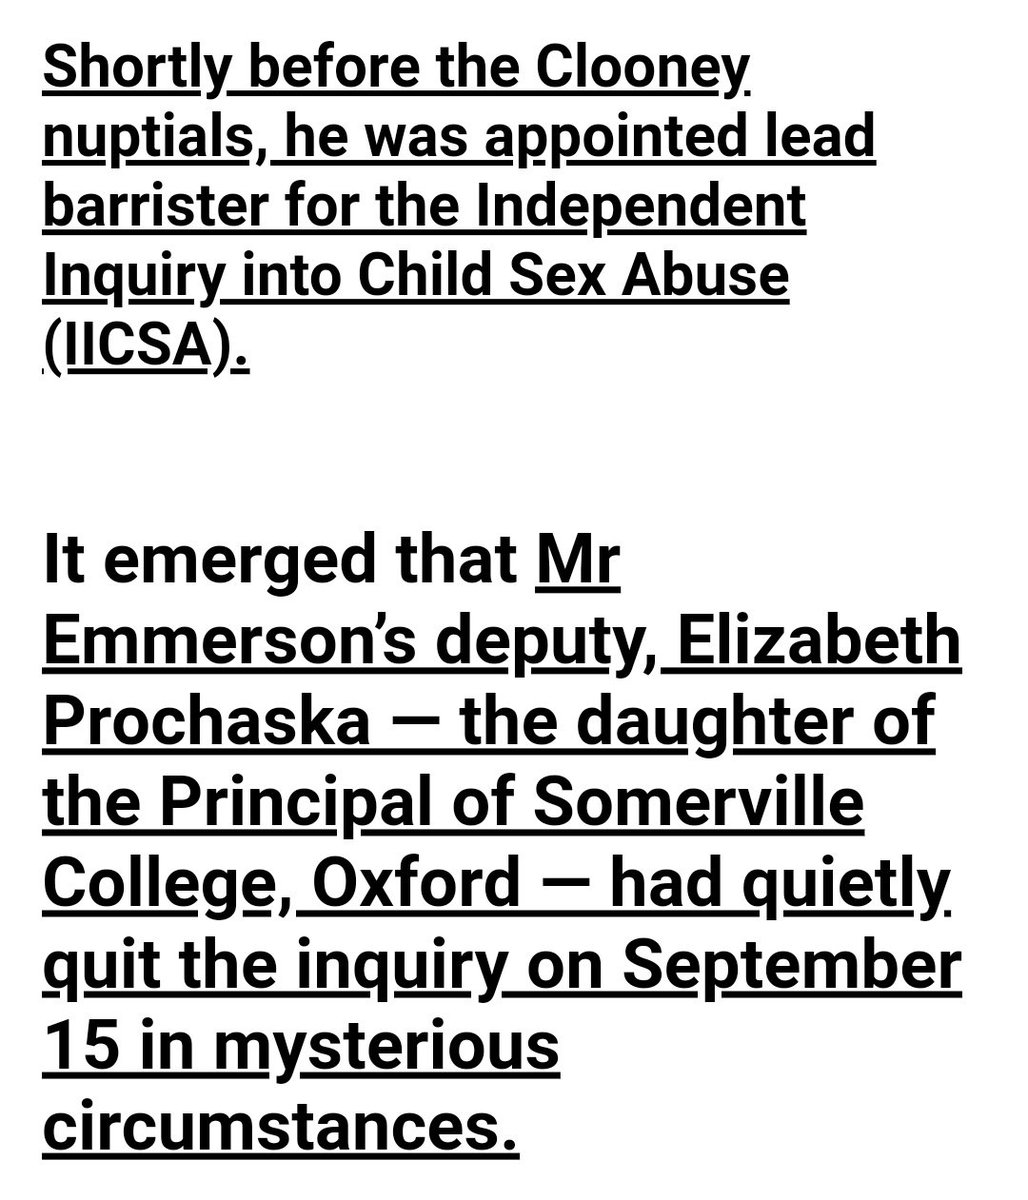 Milly Soames is good friends with Alice Prochaska, mother of Elisabeth Prochaska, deputy to Ben Emmerson, lead barrister at the  @InquiryCSA child abuse inquiry and erstwhile hubby-to-be of Ms. Barkin, who both quit the inquiry under a shroud of mystery. http://www.dailymail.co.uk/news/article-3880766/Child-abuse-inquiry-meltdown-denies-covering-claim-lawyer-groped-colleague.html#ixzz4ONSguD16